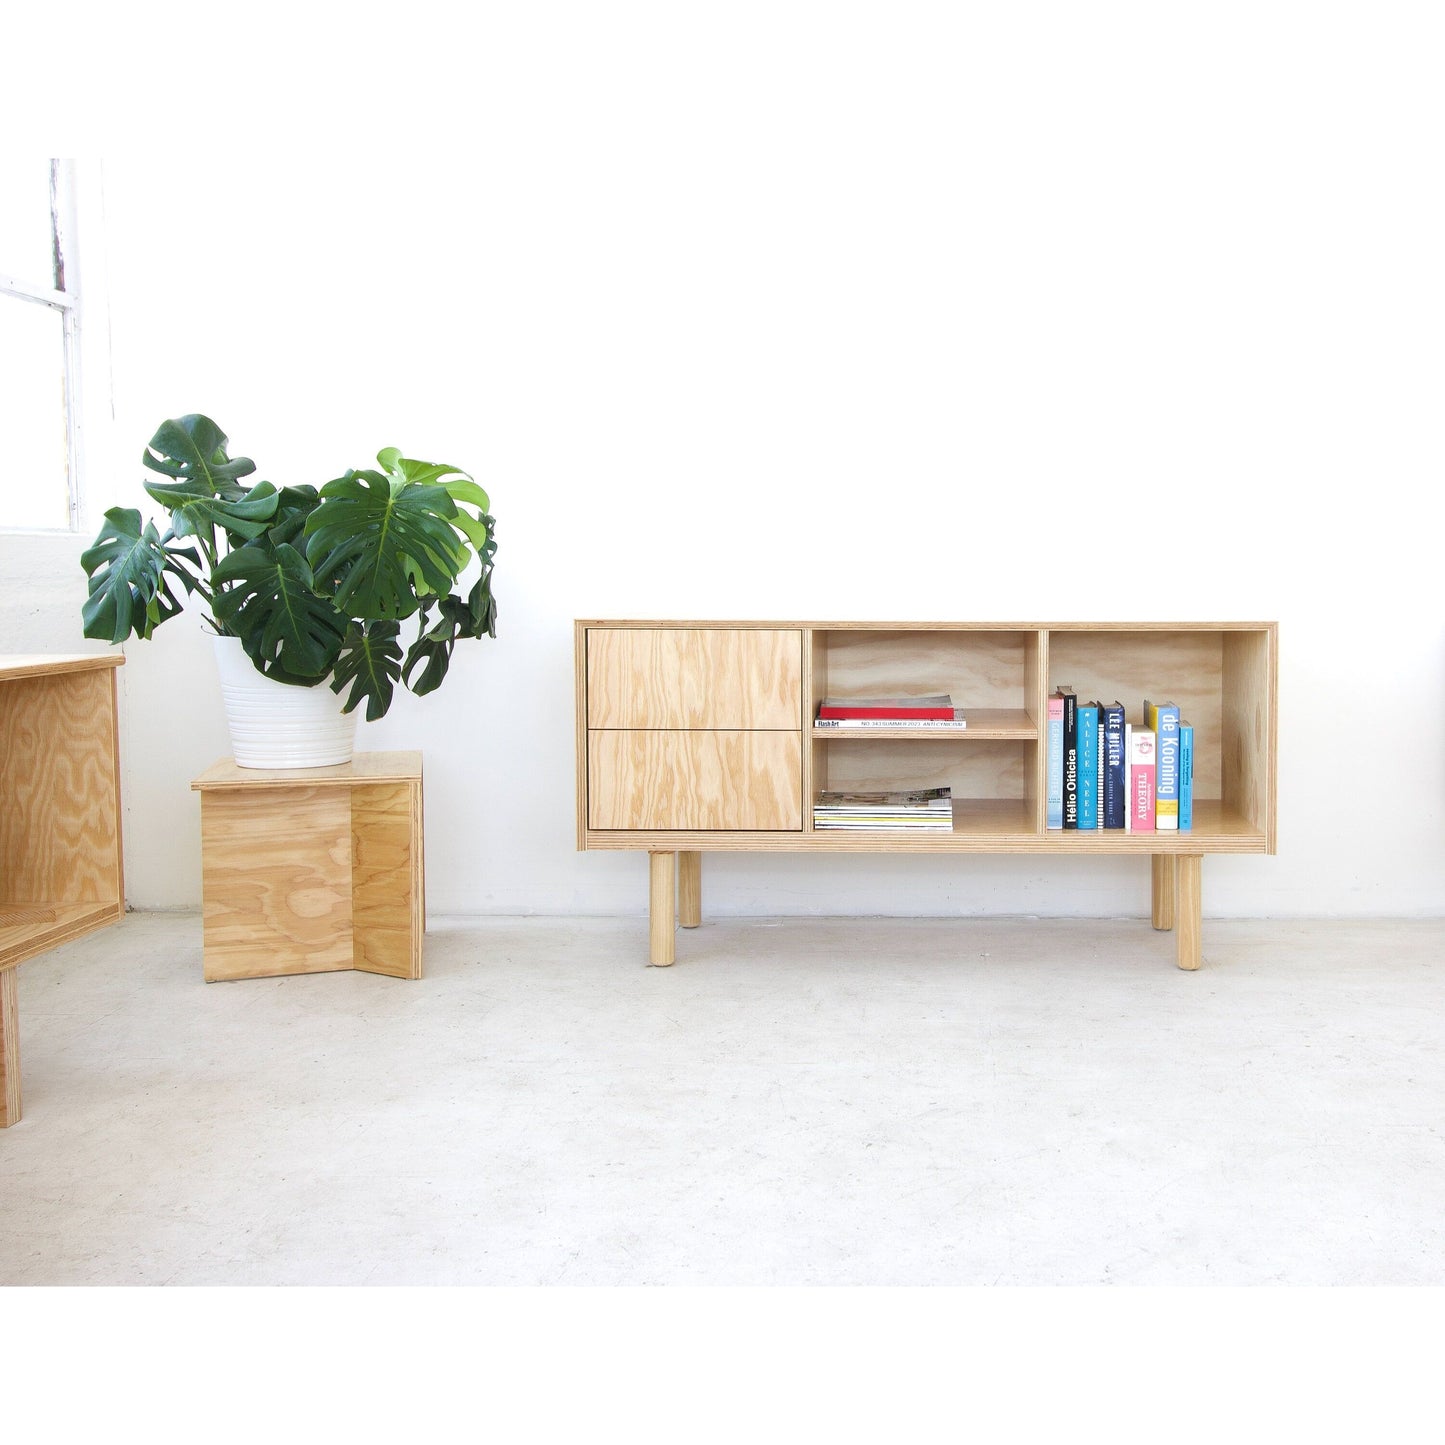 Vinyl Record Storage Cabinet | Credenza with drawers | Minimalist Sideboard | Doug Fir sideboard with drawers | Made in LA